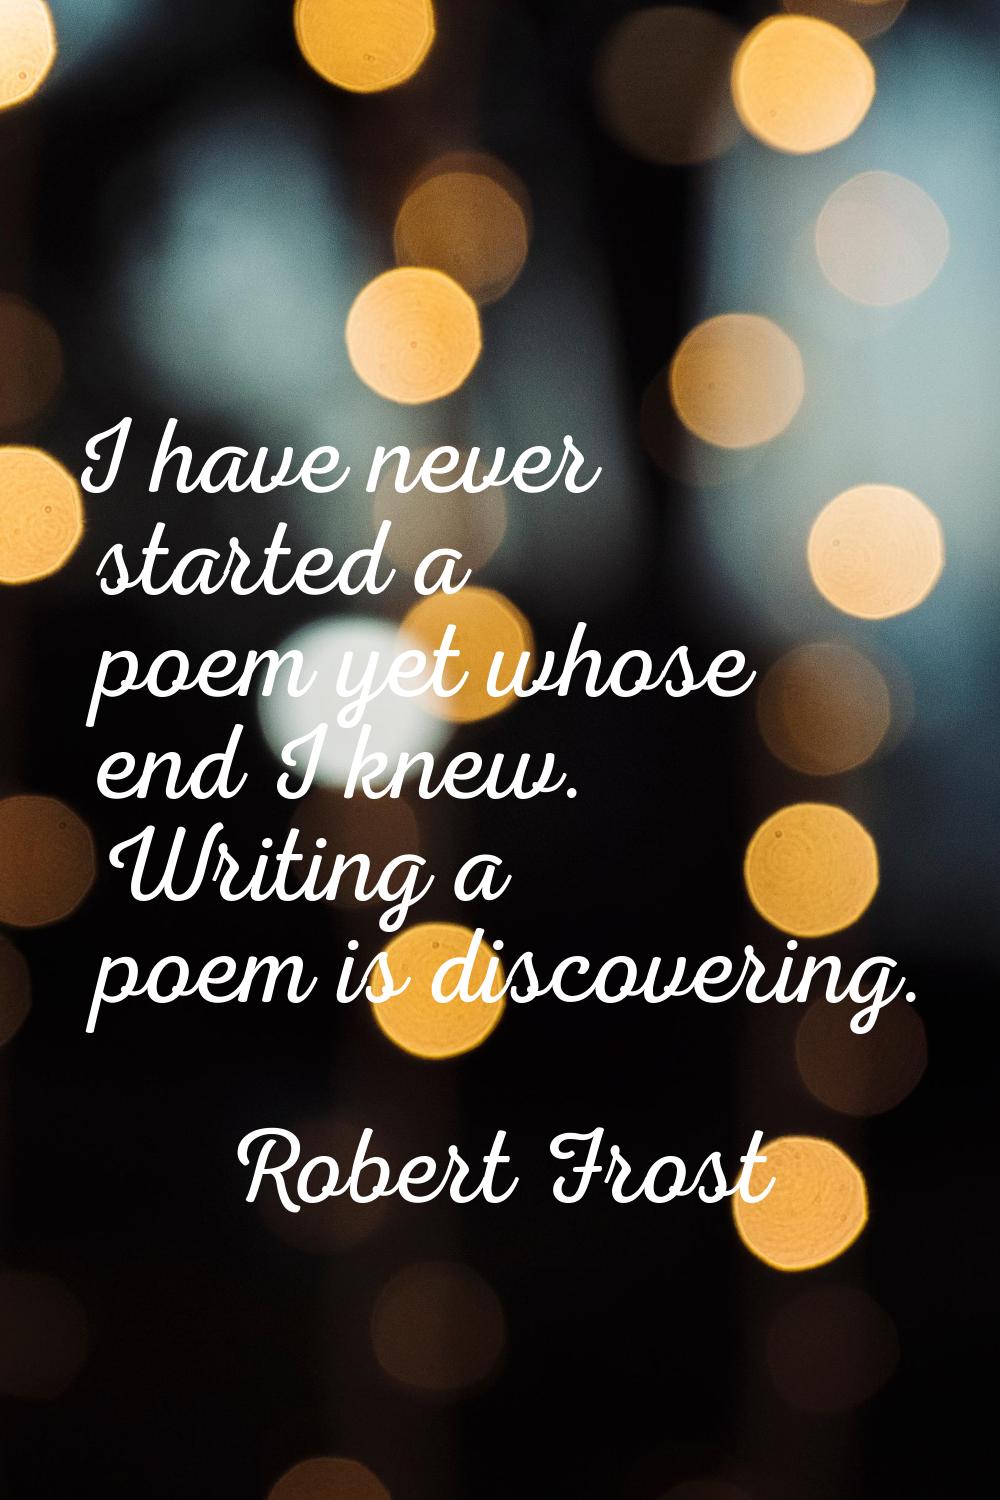 I have never started a poem yet whose end I knew. Writing a poem is discovering.